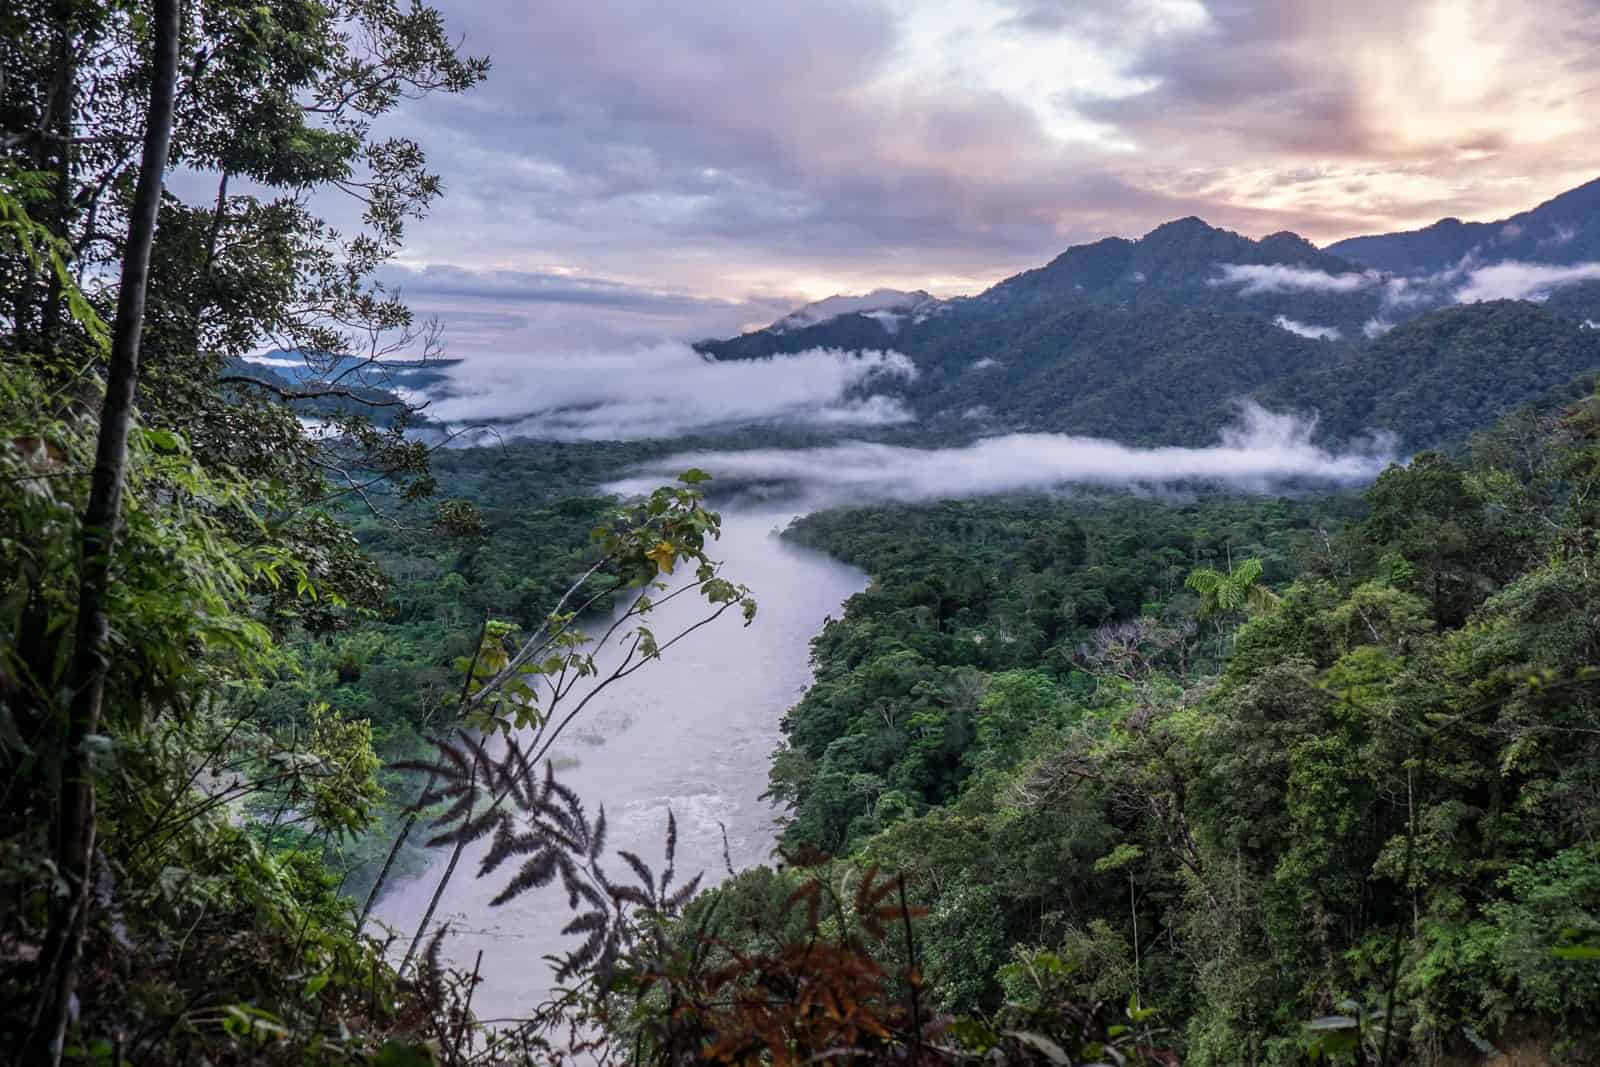 Jungle and river landscape of the Ecuador Amazon Rainforest, covered in low lying cloud mist.